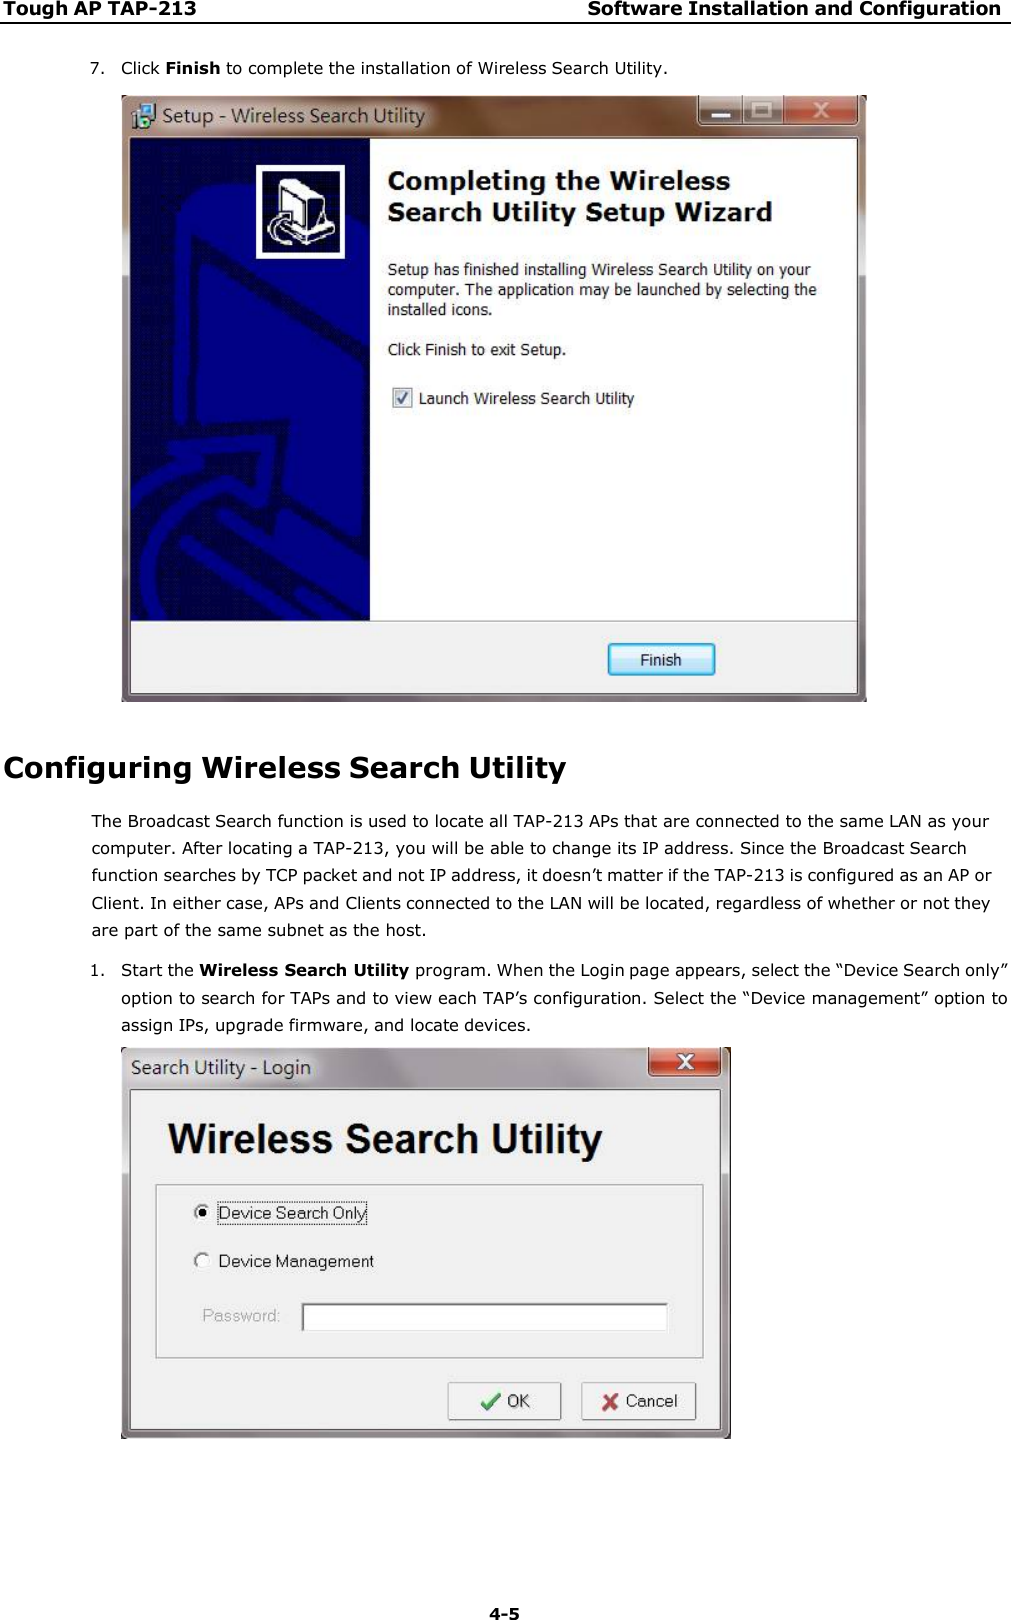 Tough AP TAP-213 Software Installation and Configuration 4-5    7. Click Finish to complete the installation of Wireless Search Utility.     Configuring Wireless Search Utility The Broadcast Search function is used to locate all TAP-213 APs that are connected to the same LAN as your computer. After locating a TAP-213, you will be able to change its IP address. Since the Broadcast Search function searches by TCP packet and not IP address, it doesn’t matter if the TAP-213 is configured as an AP or Client. In either case, APs and Clients connected to the LAN will be located, regardless of whether or not they are part of the same subnet as the host. 1. Start the Wireless Search Utility program. When the Login page appears, select the “Device Search only” option to search for TAPs and to view each TAP’s configuration. Select the “Device management” option to assign IPs, upgrade firmware, and locate devices.   